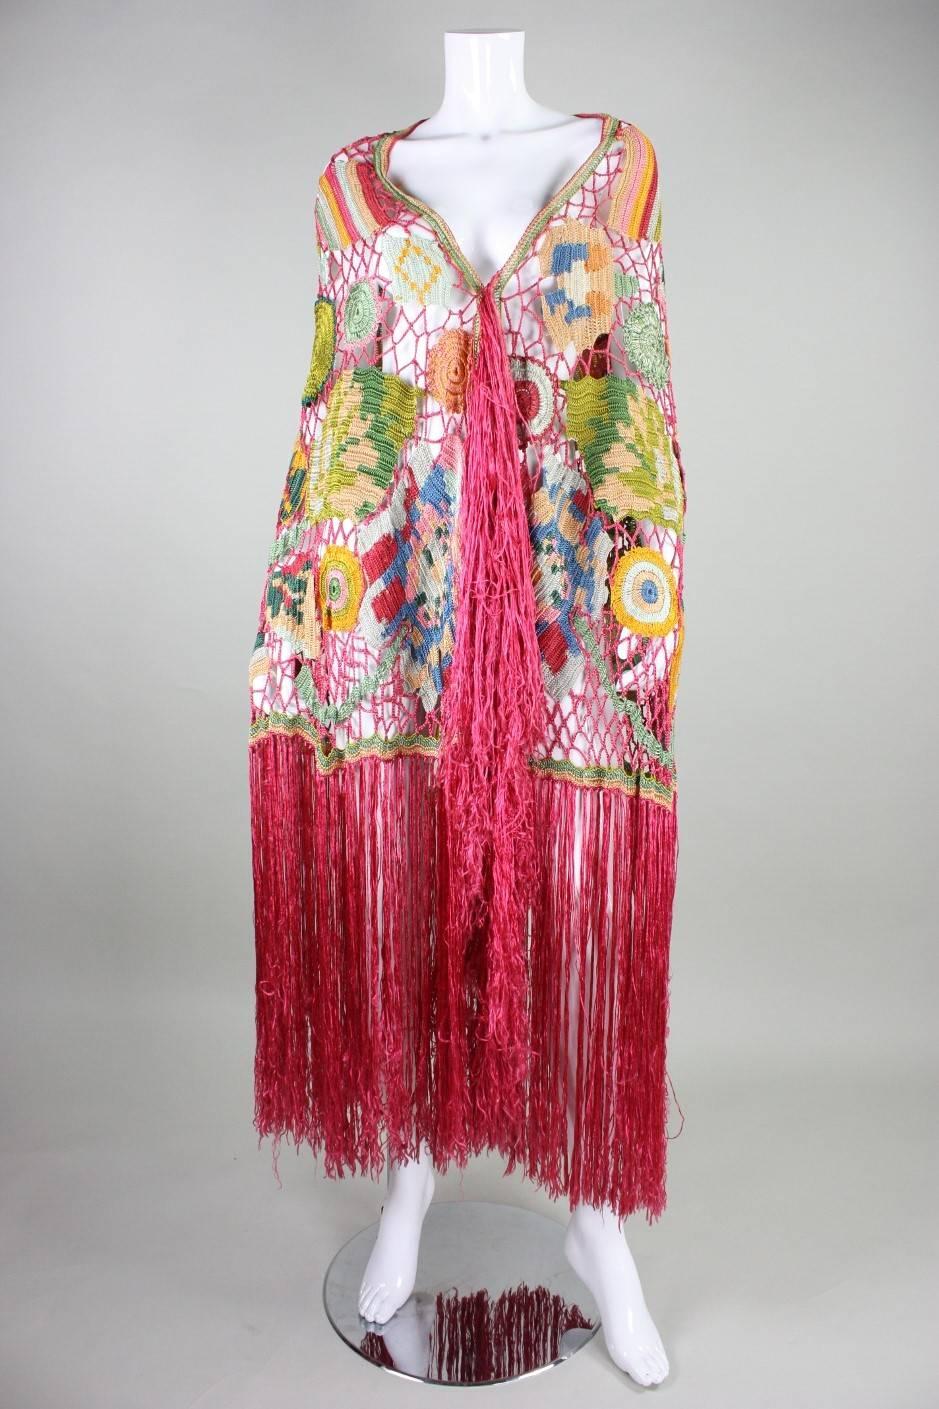 Vintage shawl dates to the 1920's and is made of a polychromatic blend of bright rayon.  Abstract floral motif contains birds in the design, and although the design is not symmetrical, there is a balance of color and weight that exists within the